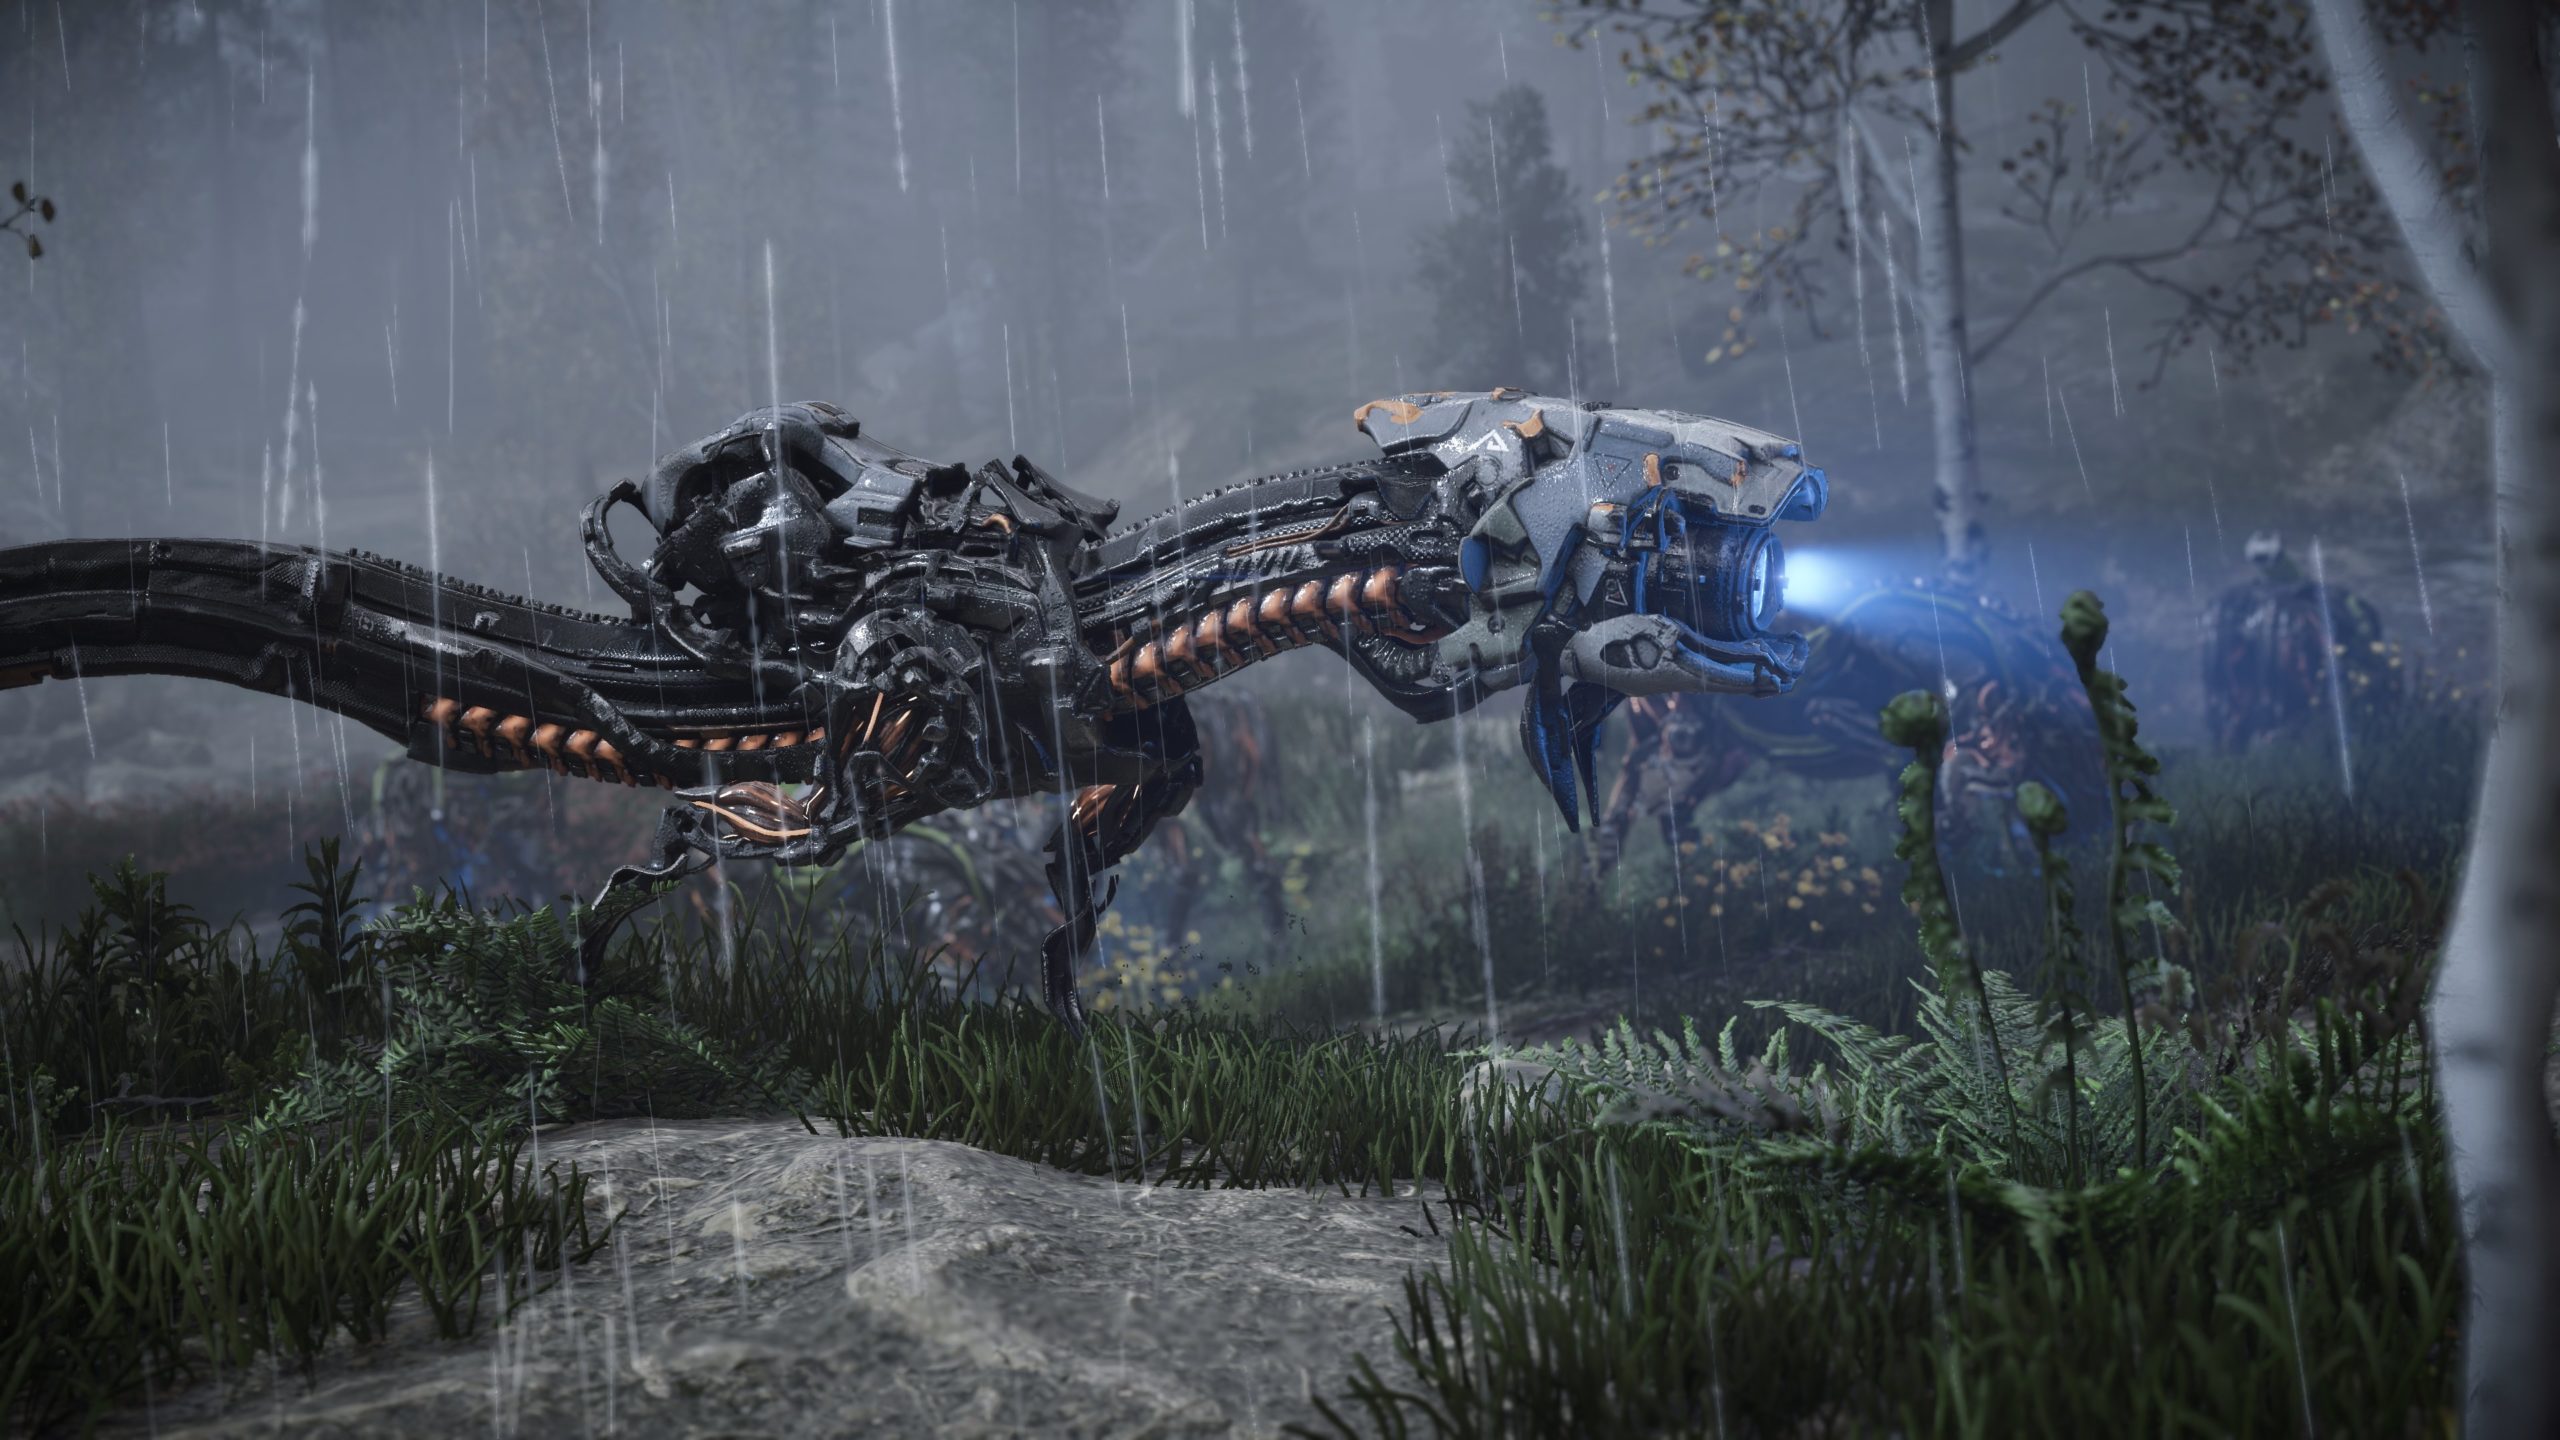 Horizon Zero Dawn Review: almost unplayable and an insult to